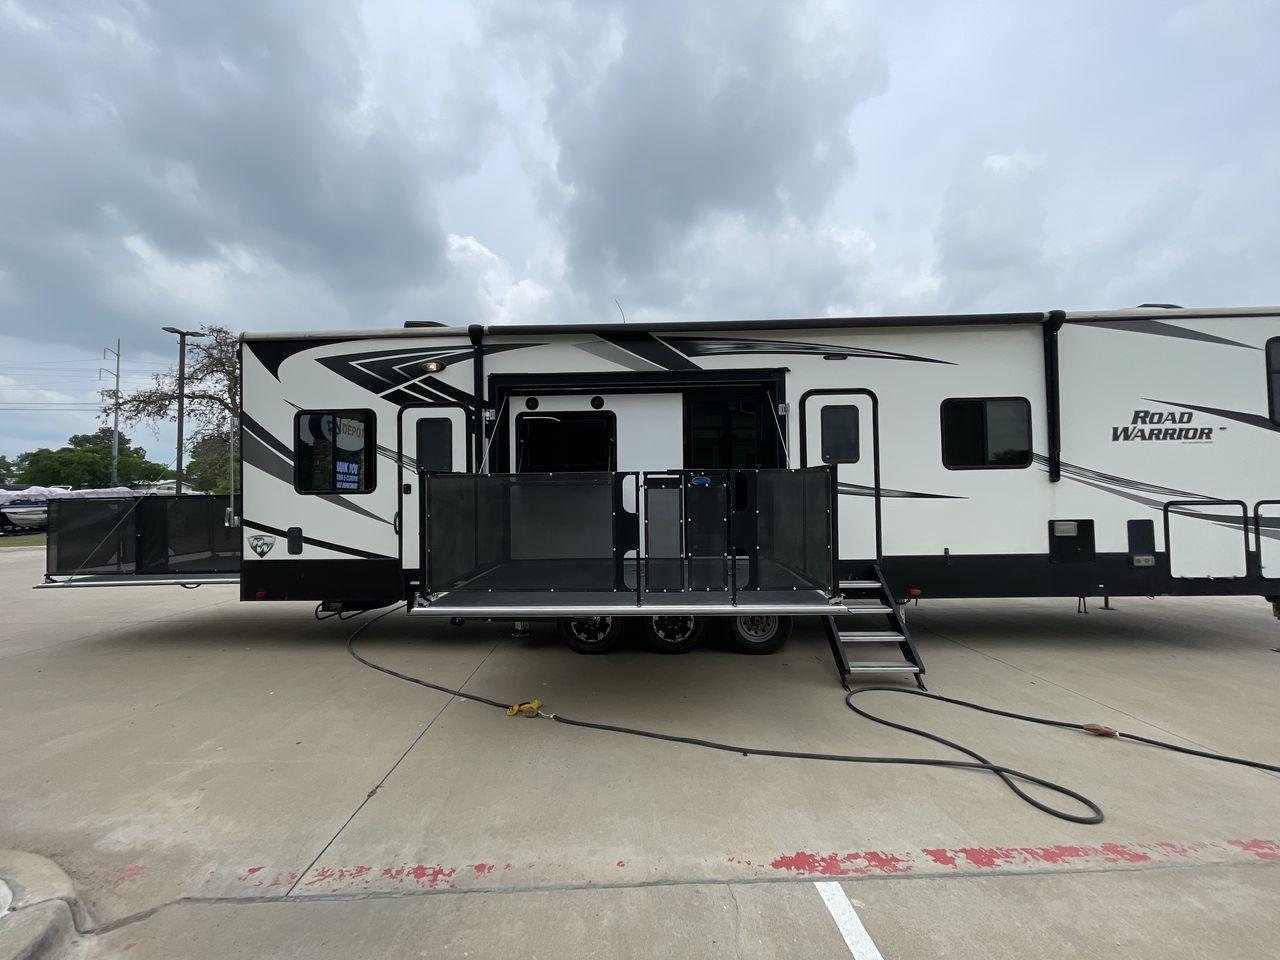 2019 HEARTLAND ROAD WARRIOR 427RW (5SFCG4435KE) , Length: 44.08 ft. | Dry Weight: 16,400 lbs. | Gross Weight: 20,000 lbs. | Slides: 2 transmission, located at 4319 N Main Street, Cleburne, TX, 76033, (817) 221-0660, 32.435829, -97.384178 - The 2019 Heartland Road Warrior 427RW fifth wheel toy hauler is ready for your next journey. The length of this amazing RV is 44.08 feet, its dry weight is 16,400 lbs and its gross weight is 20,000 lbs. This makes it stable and long-lasting on the road. This RV is strong and stylish, with two slides - Photo #24